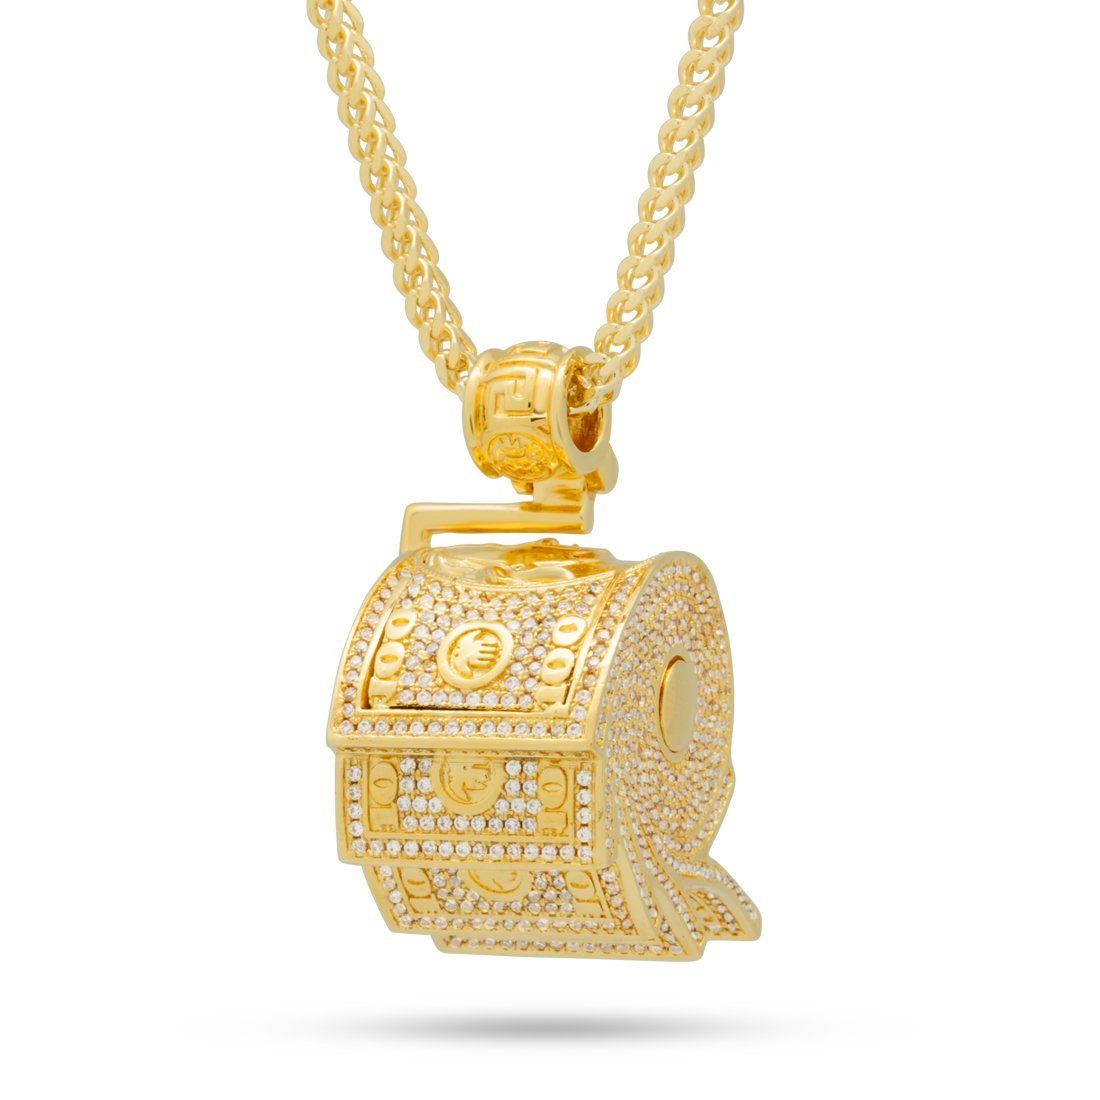 The Money Roll Necklace - Designed by Snoop Dogg x King Ice